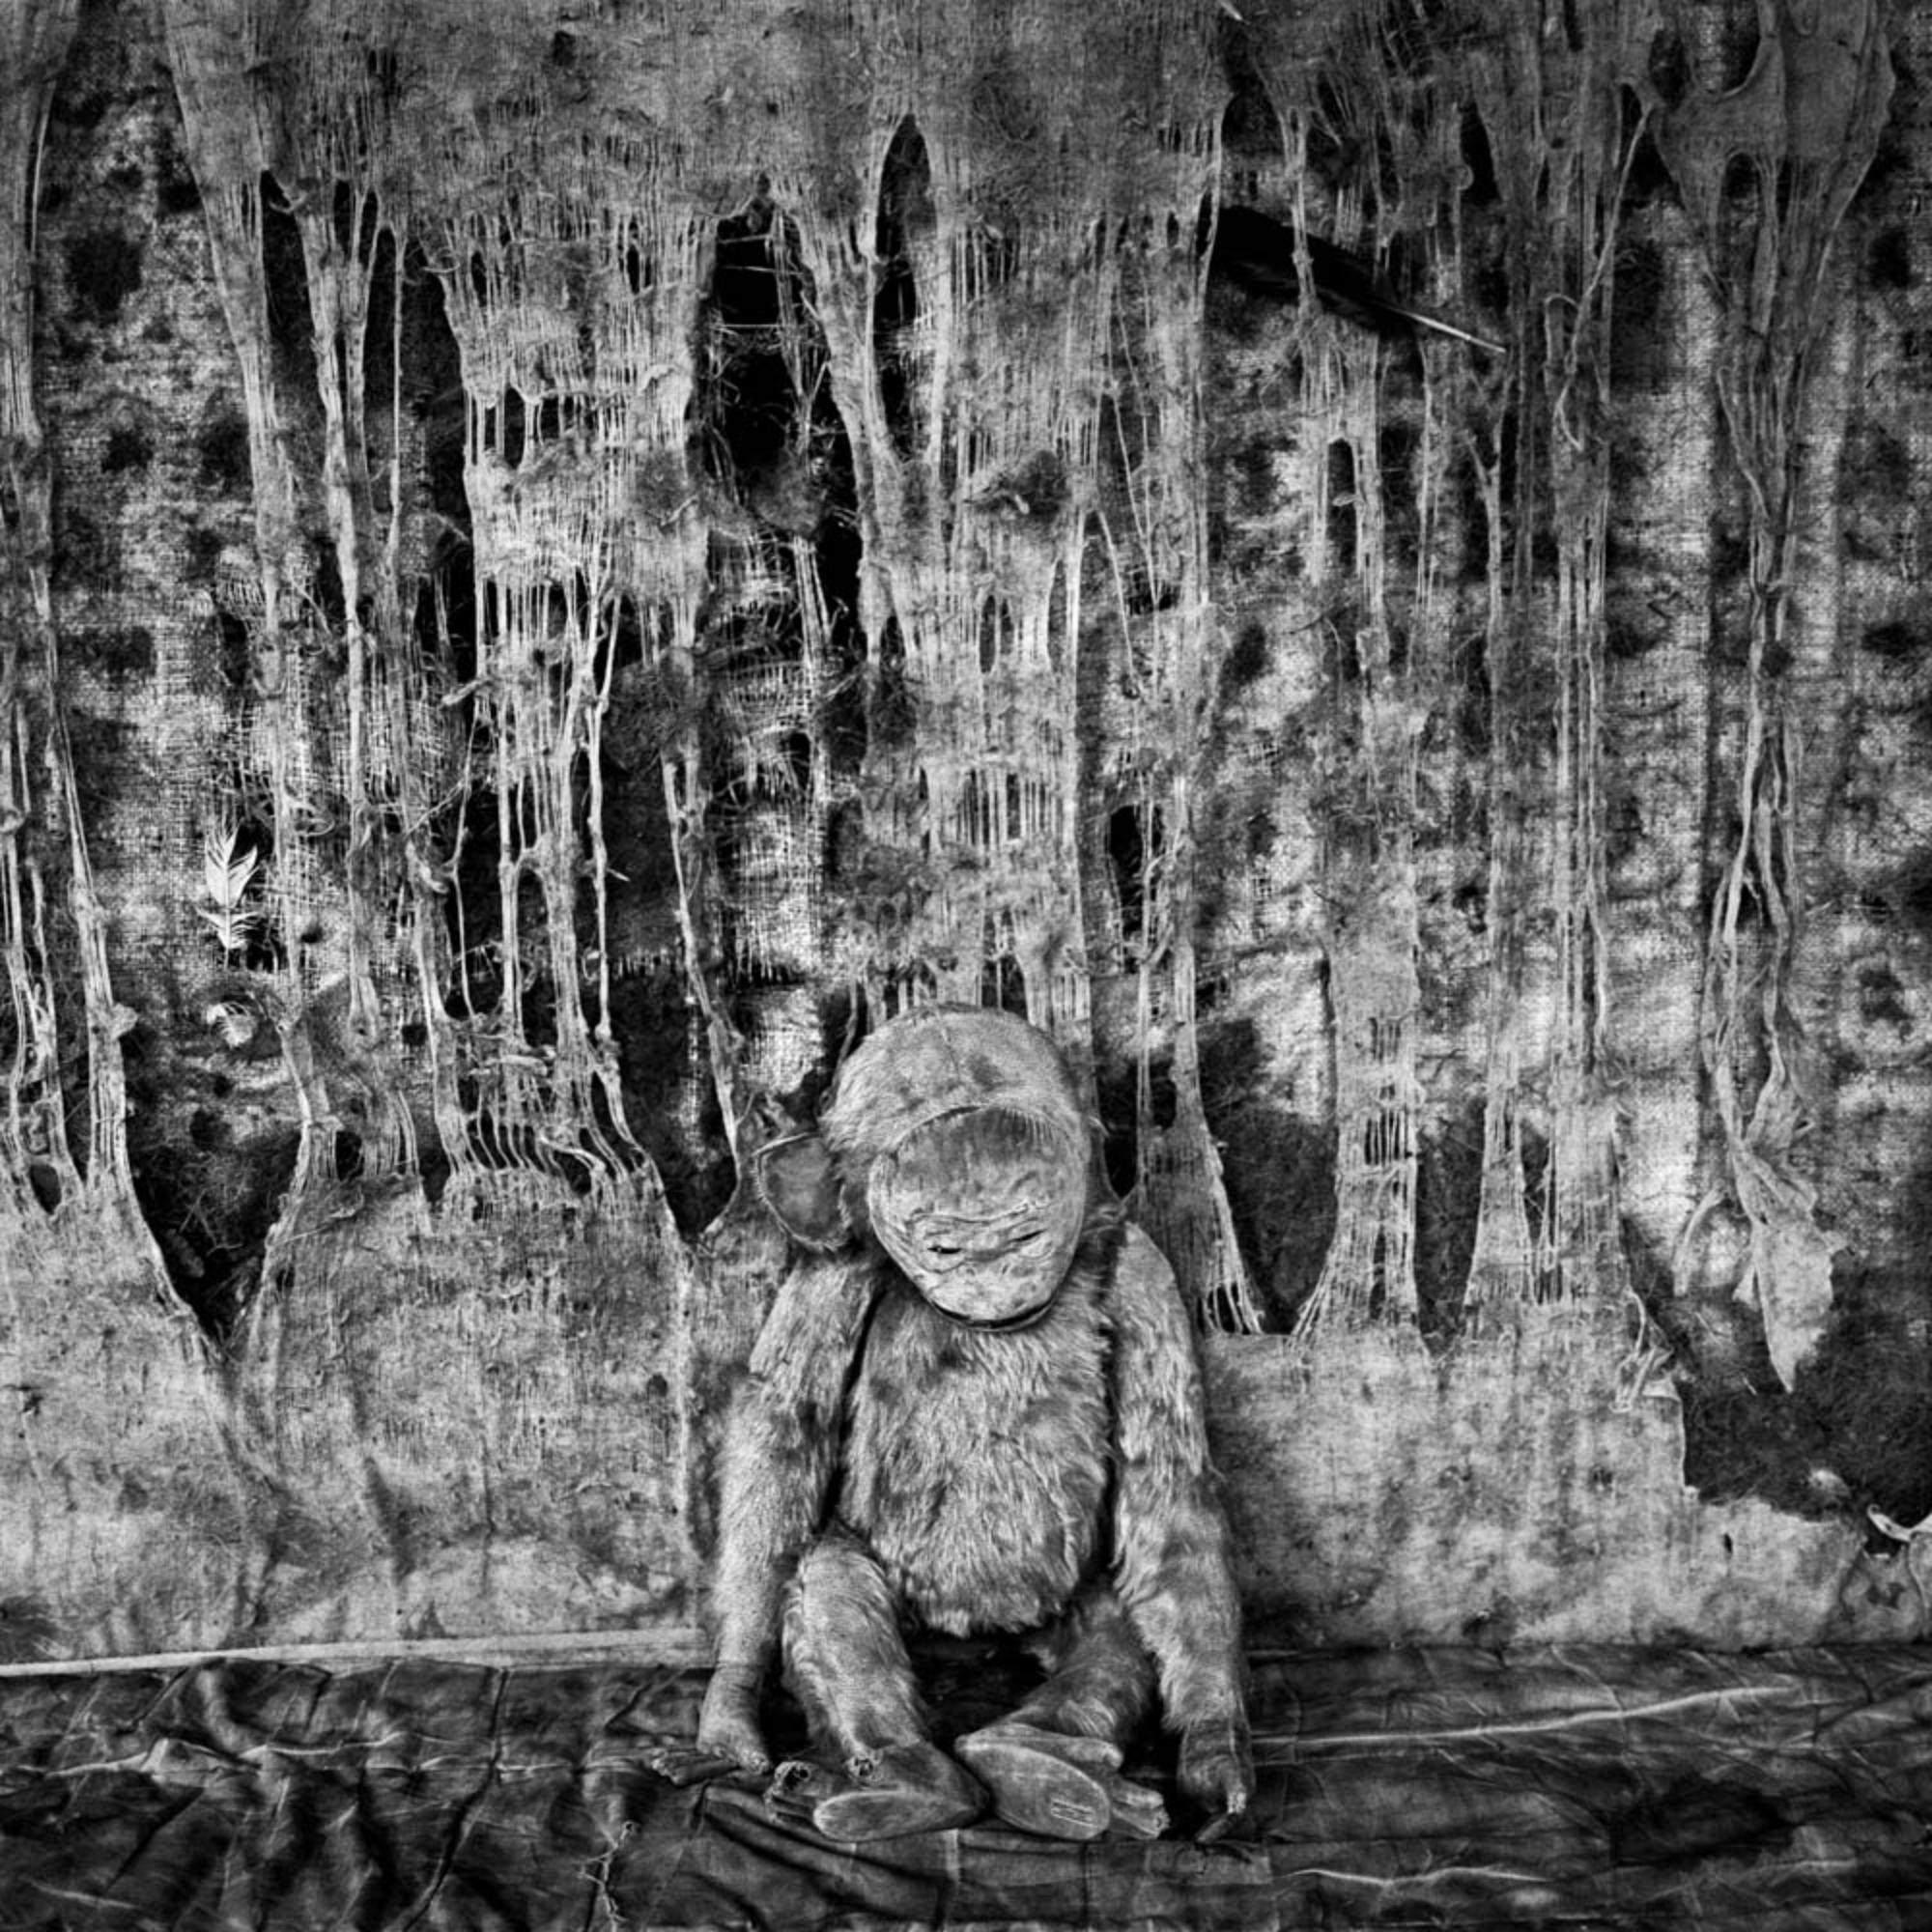 Pathos – Roger Ballen, Black and White, Staged, Vintage Photography, Monkey